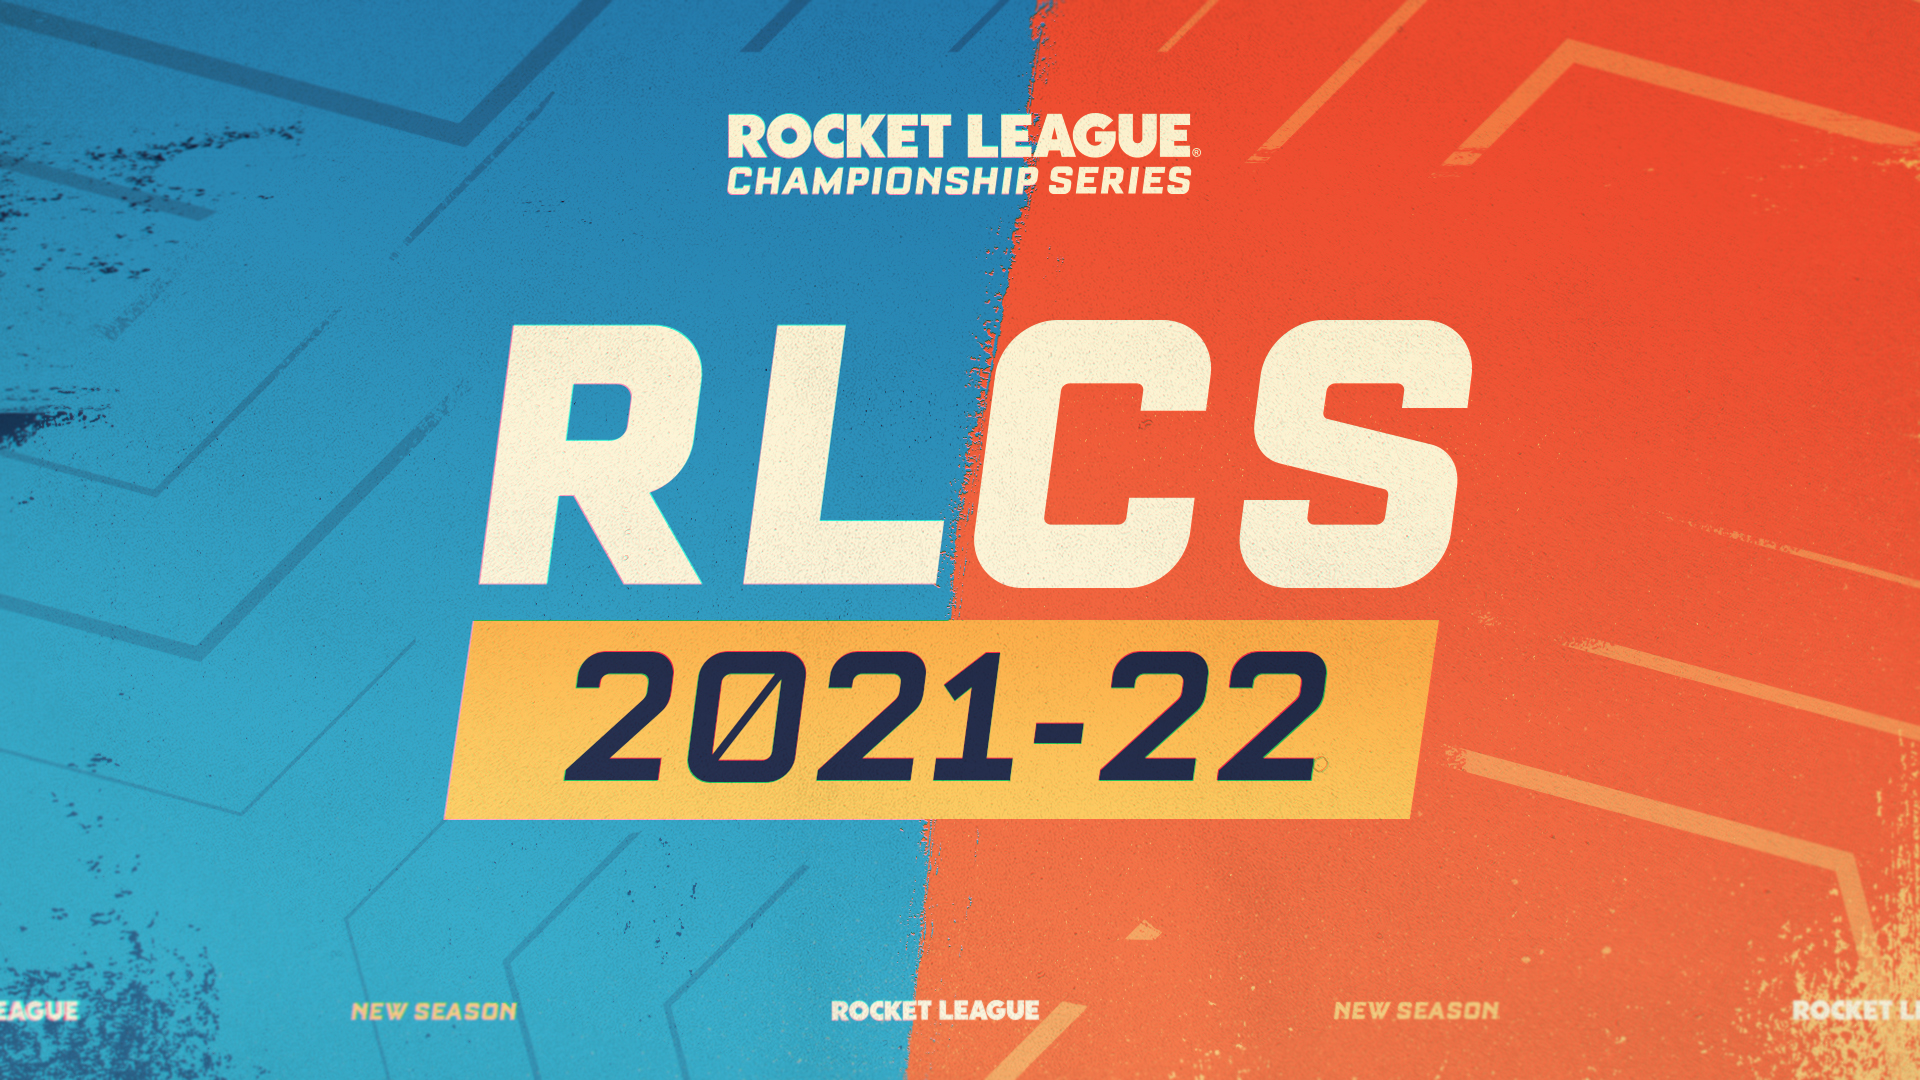 Rocket League Championship Series (RLCS) is expanding to more regions